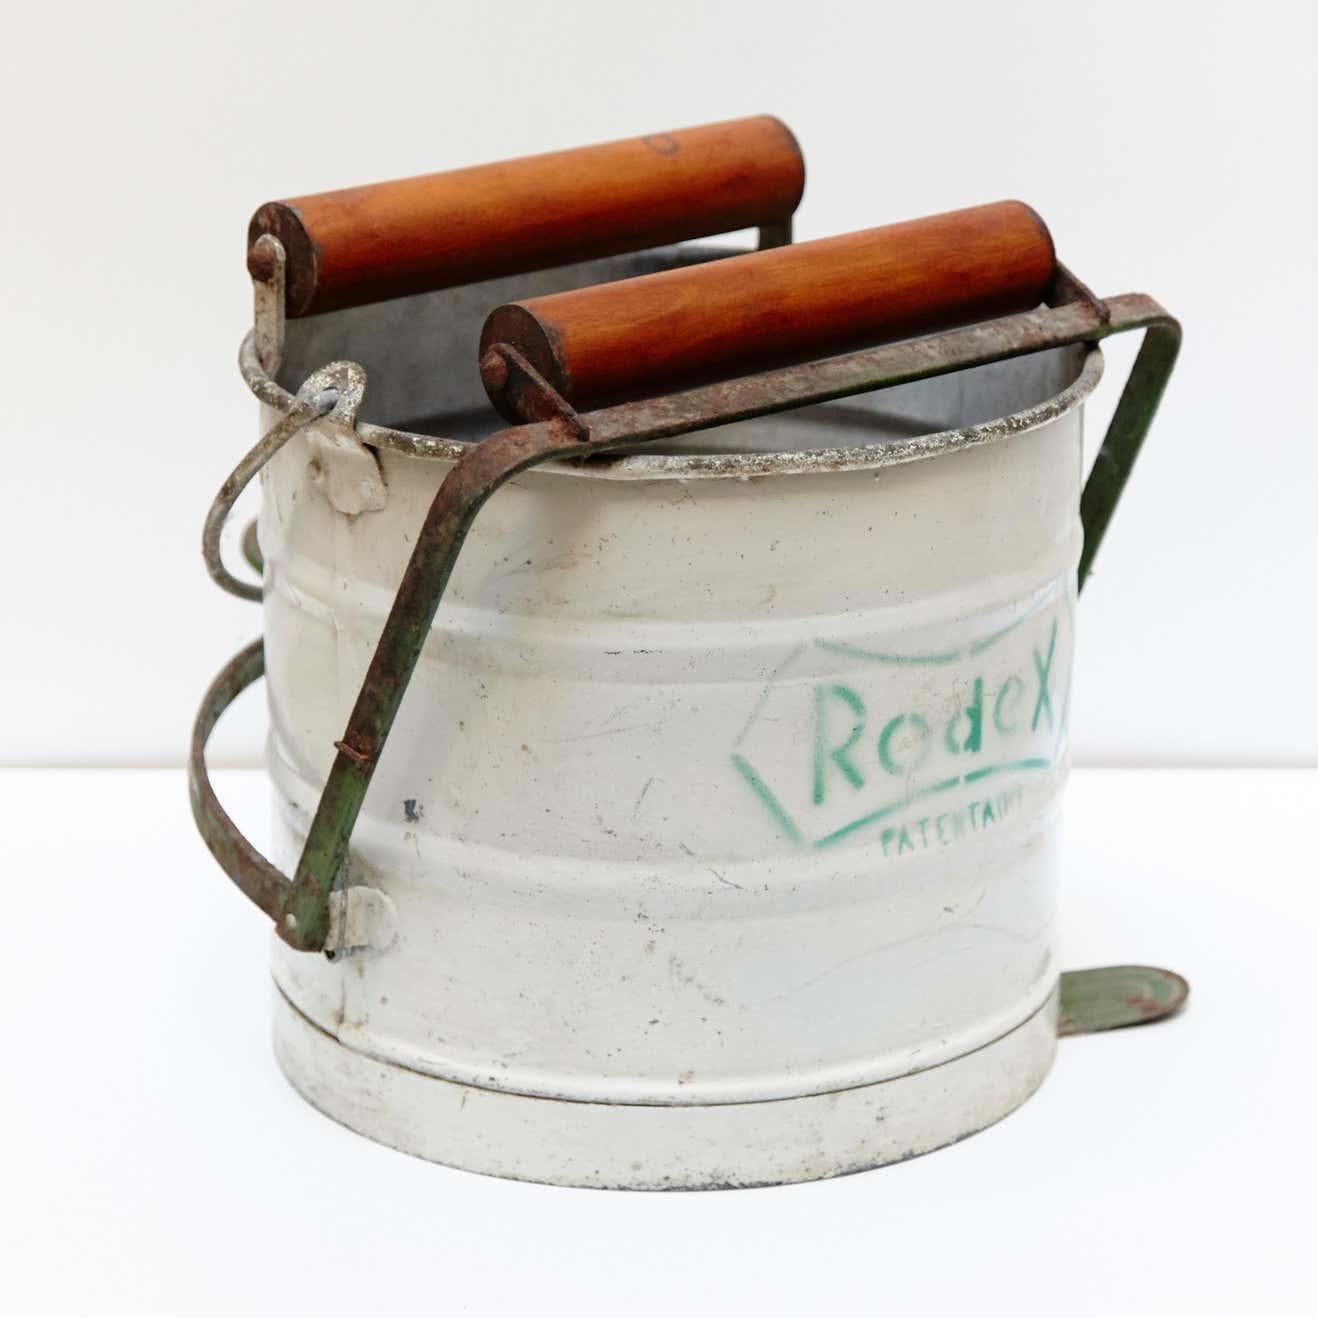 First patent mop bucket designed by Manuel Jalon Corominas.
Manufactured by Rodex.
Spain
1957-1960.